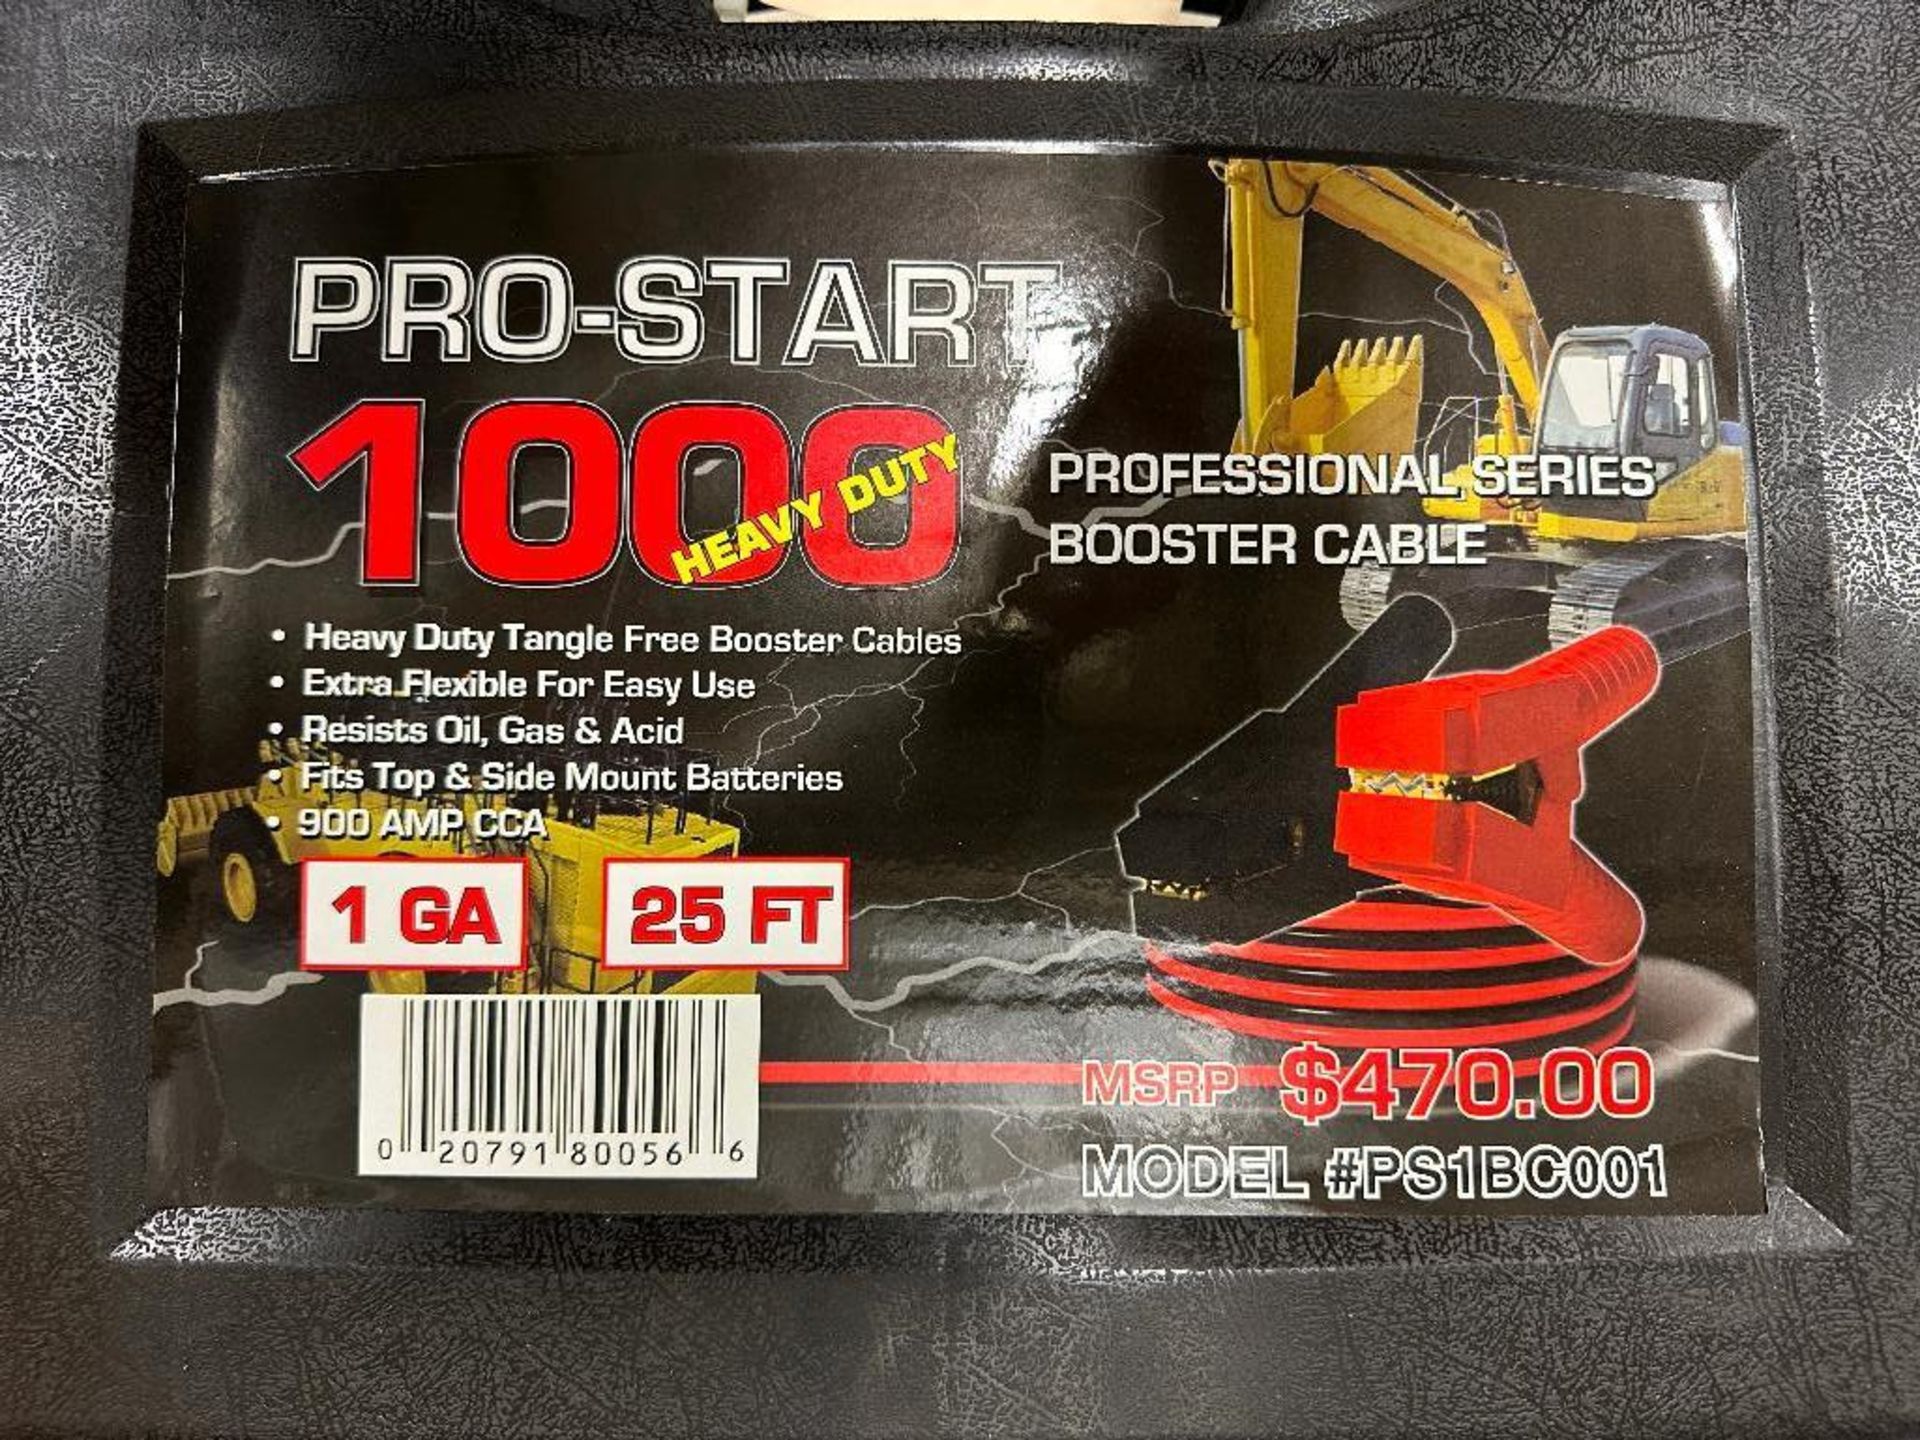 Pro-Start 1000 HD 25ft. 1Ga. Professional Series Booster Cables - Image 4 of 4